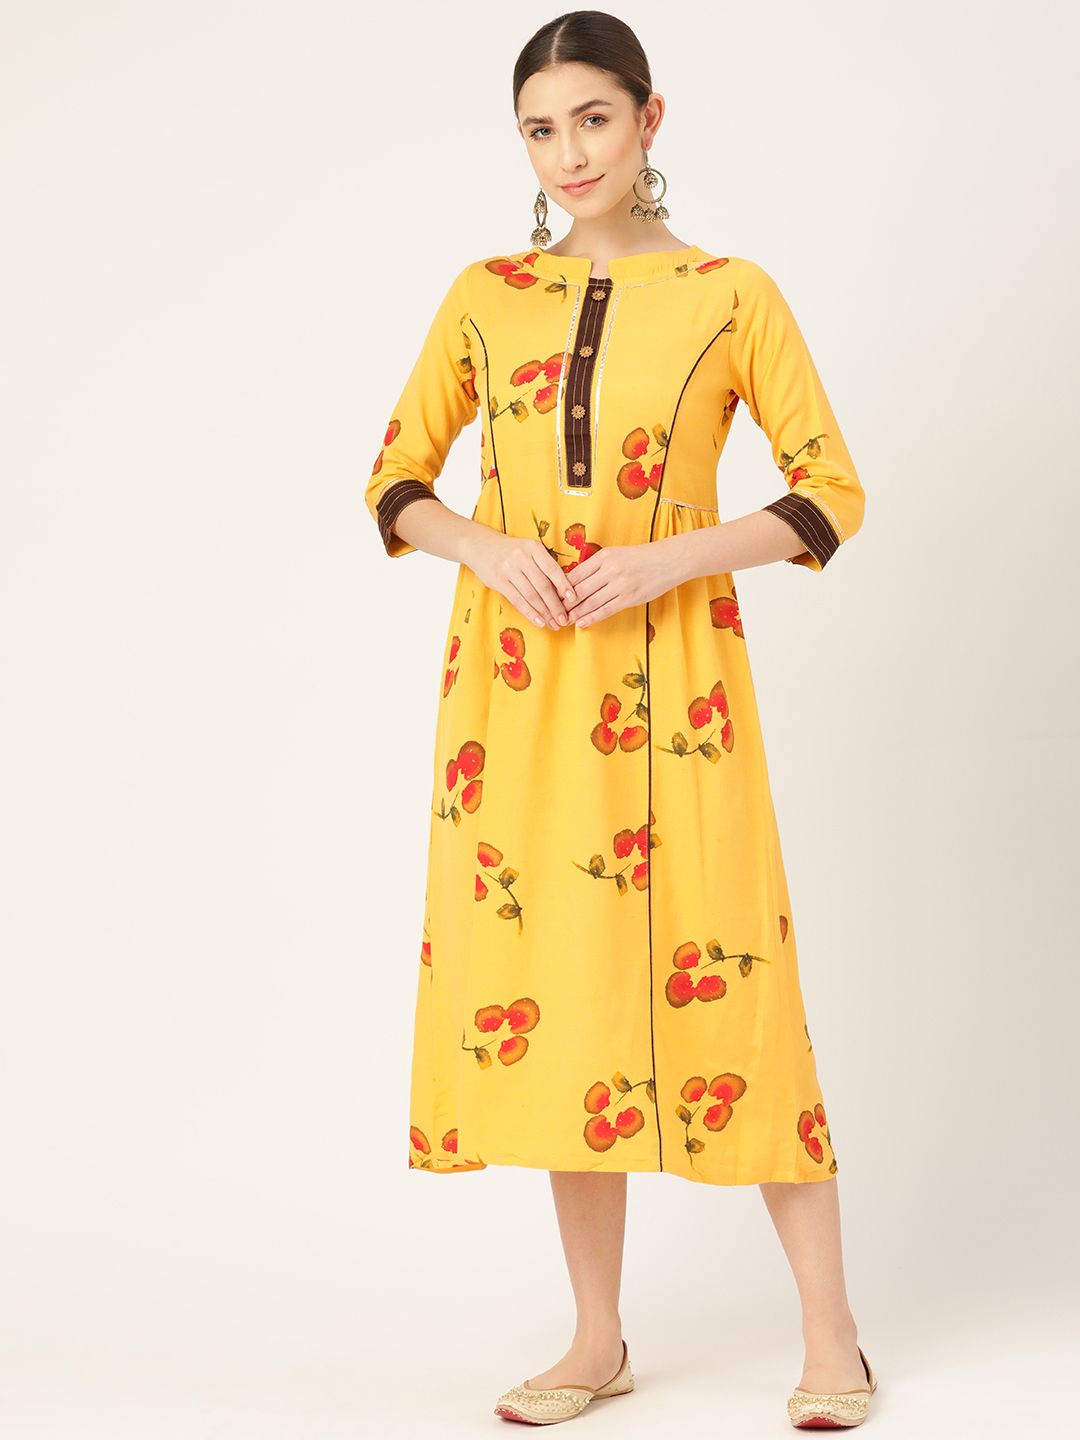 VAABA Yellow Floral Ethnic A-Line Midi Dress Price in India